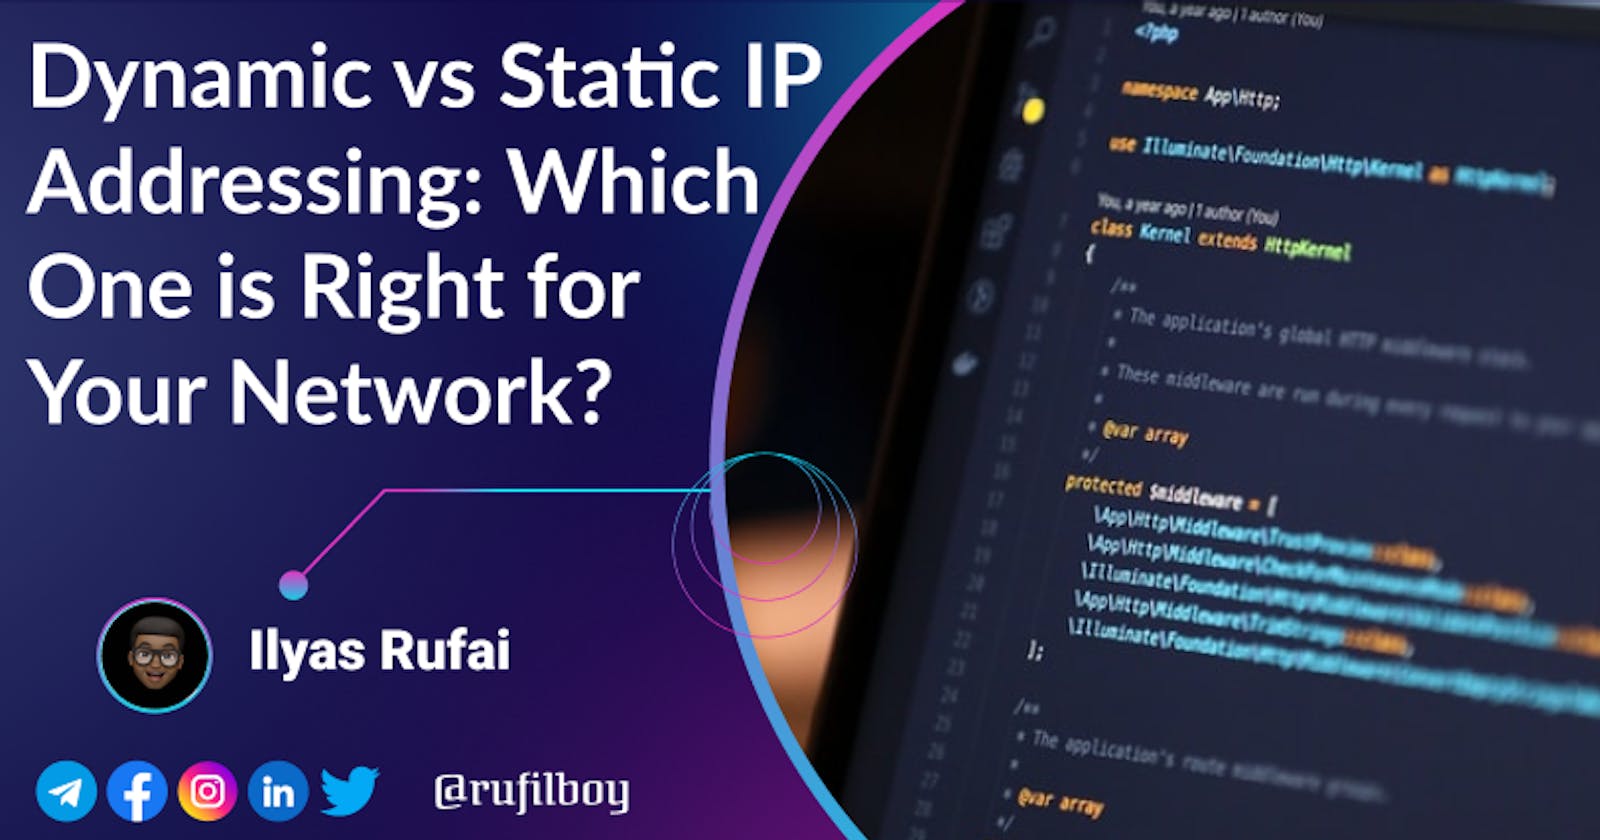 Dynamic vs Static IP Addressing: Which One is Right for Your Network?